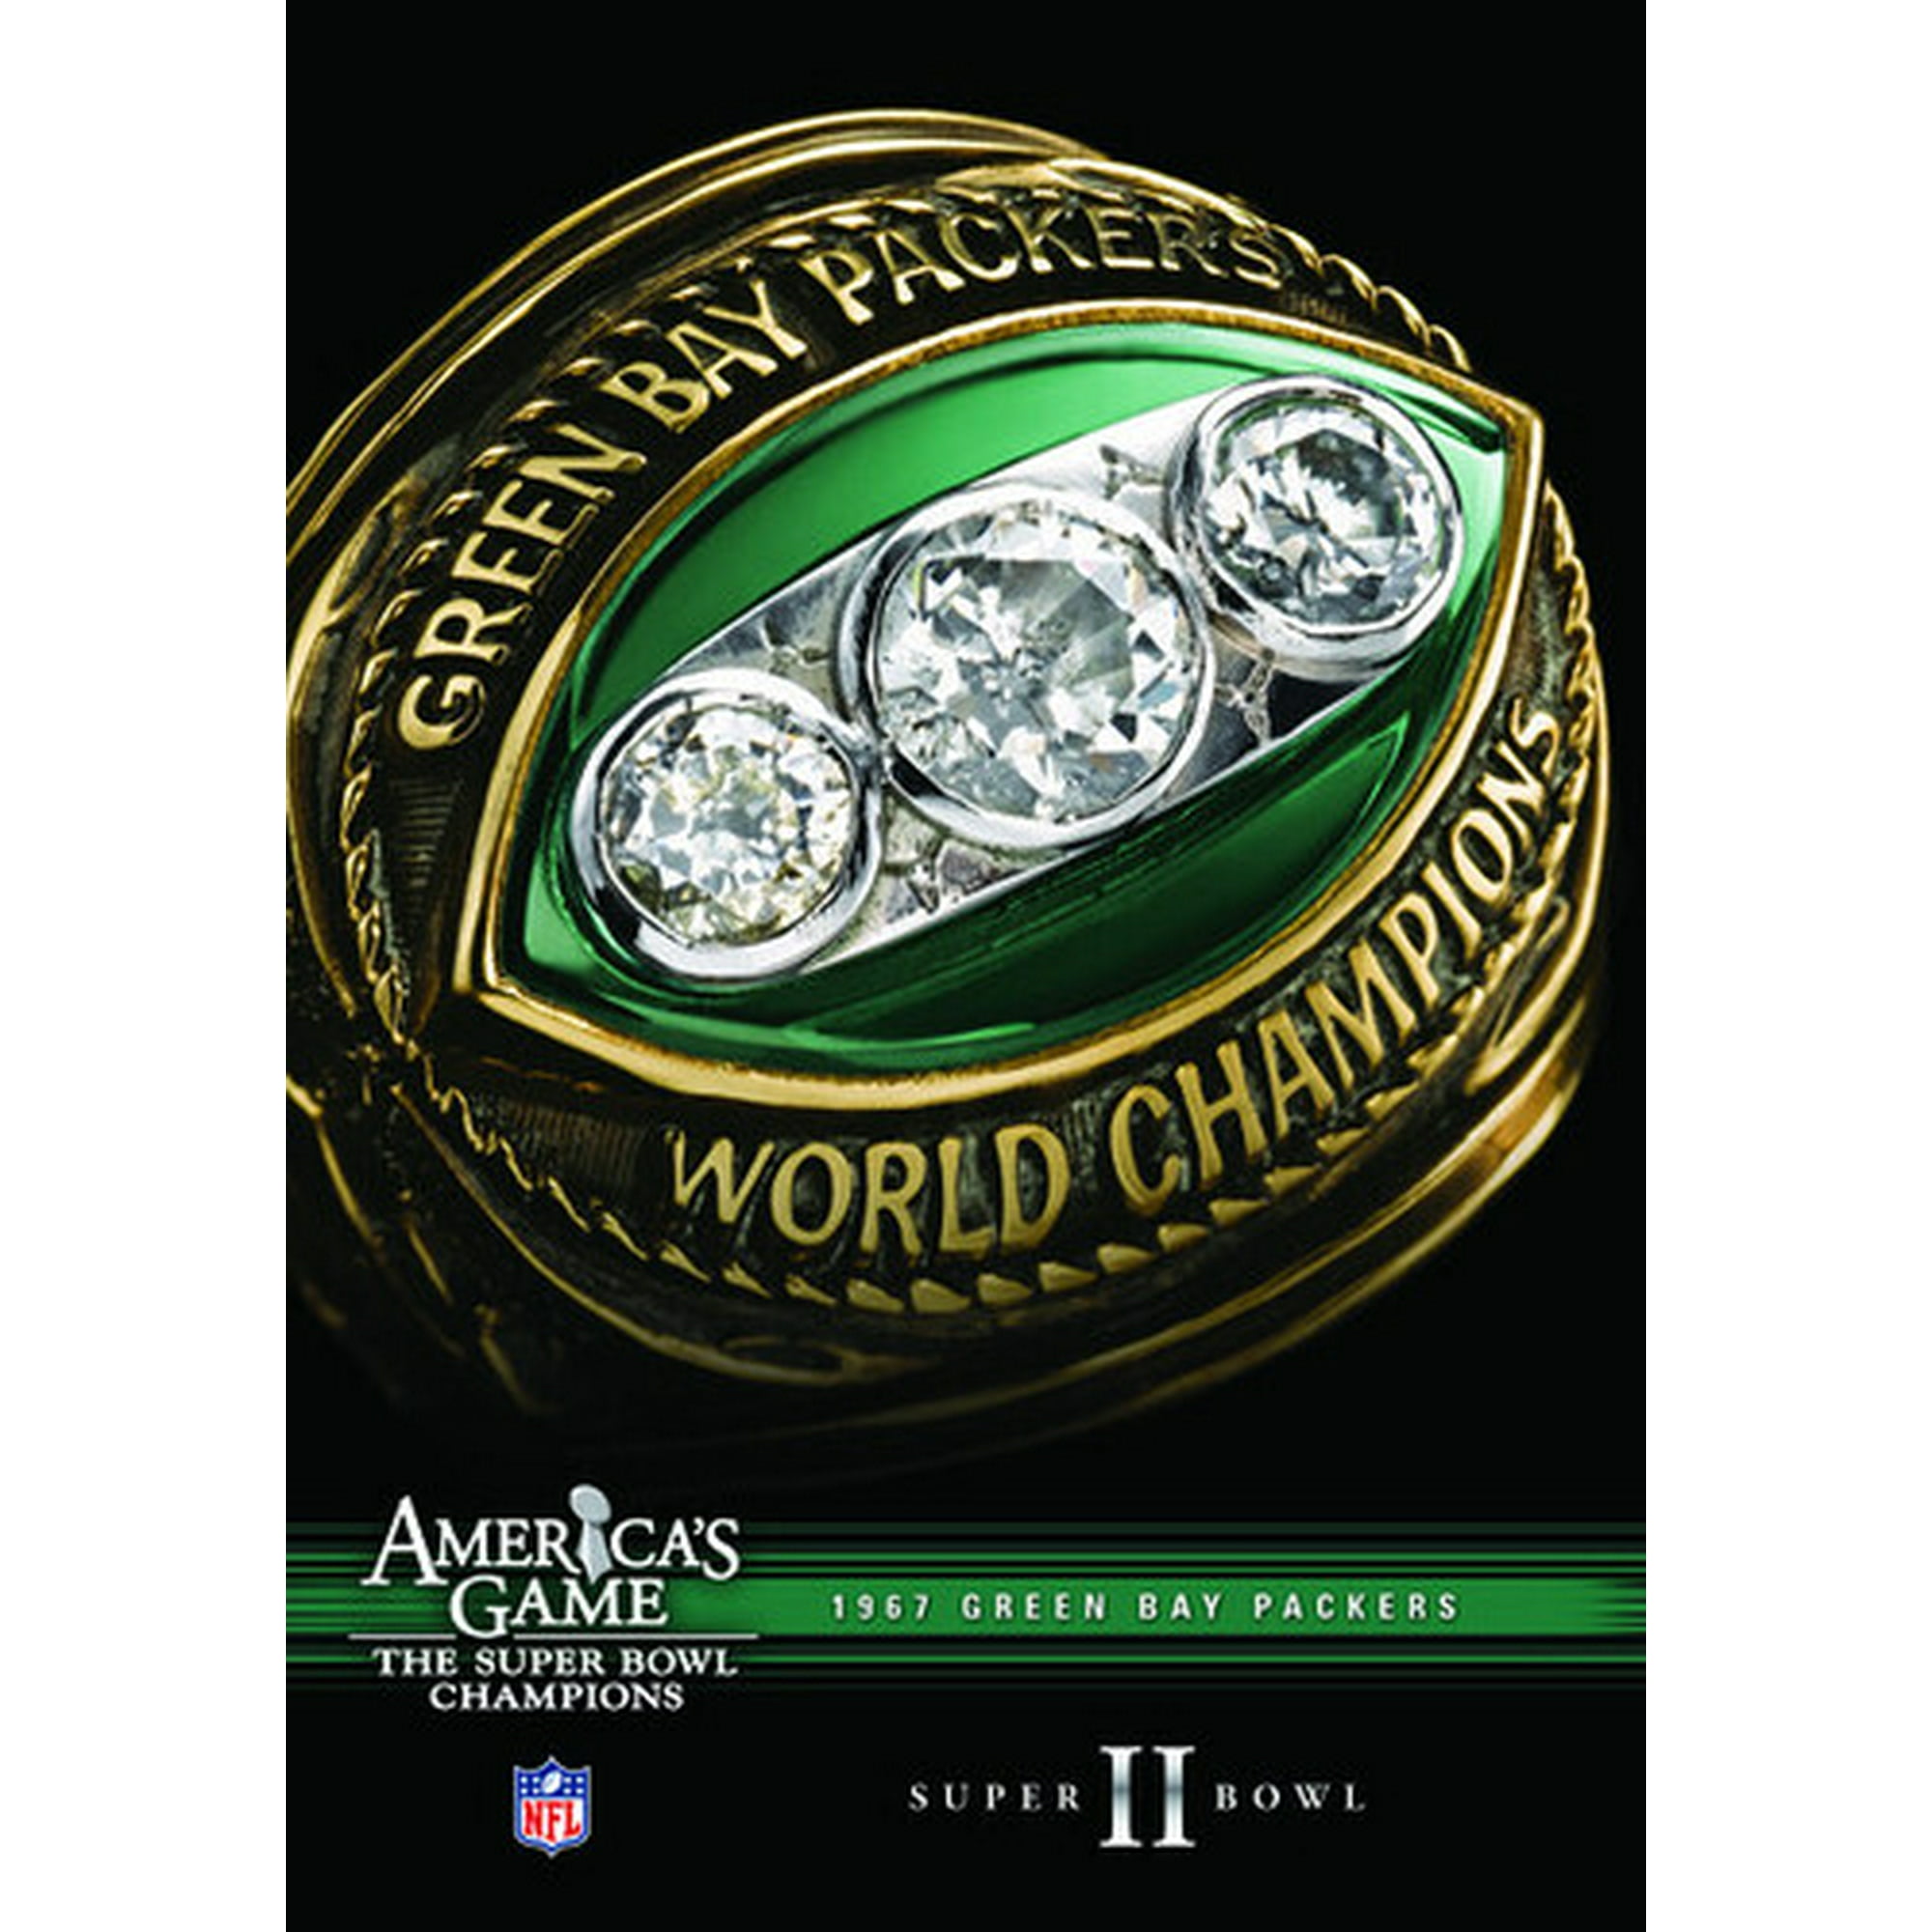 Green Bay Packers, Superbowl Champions